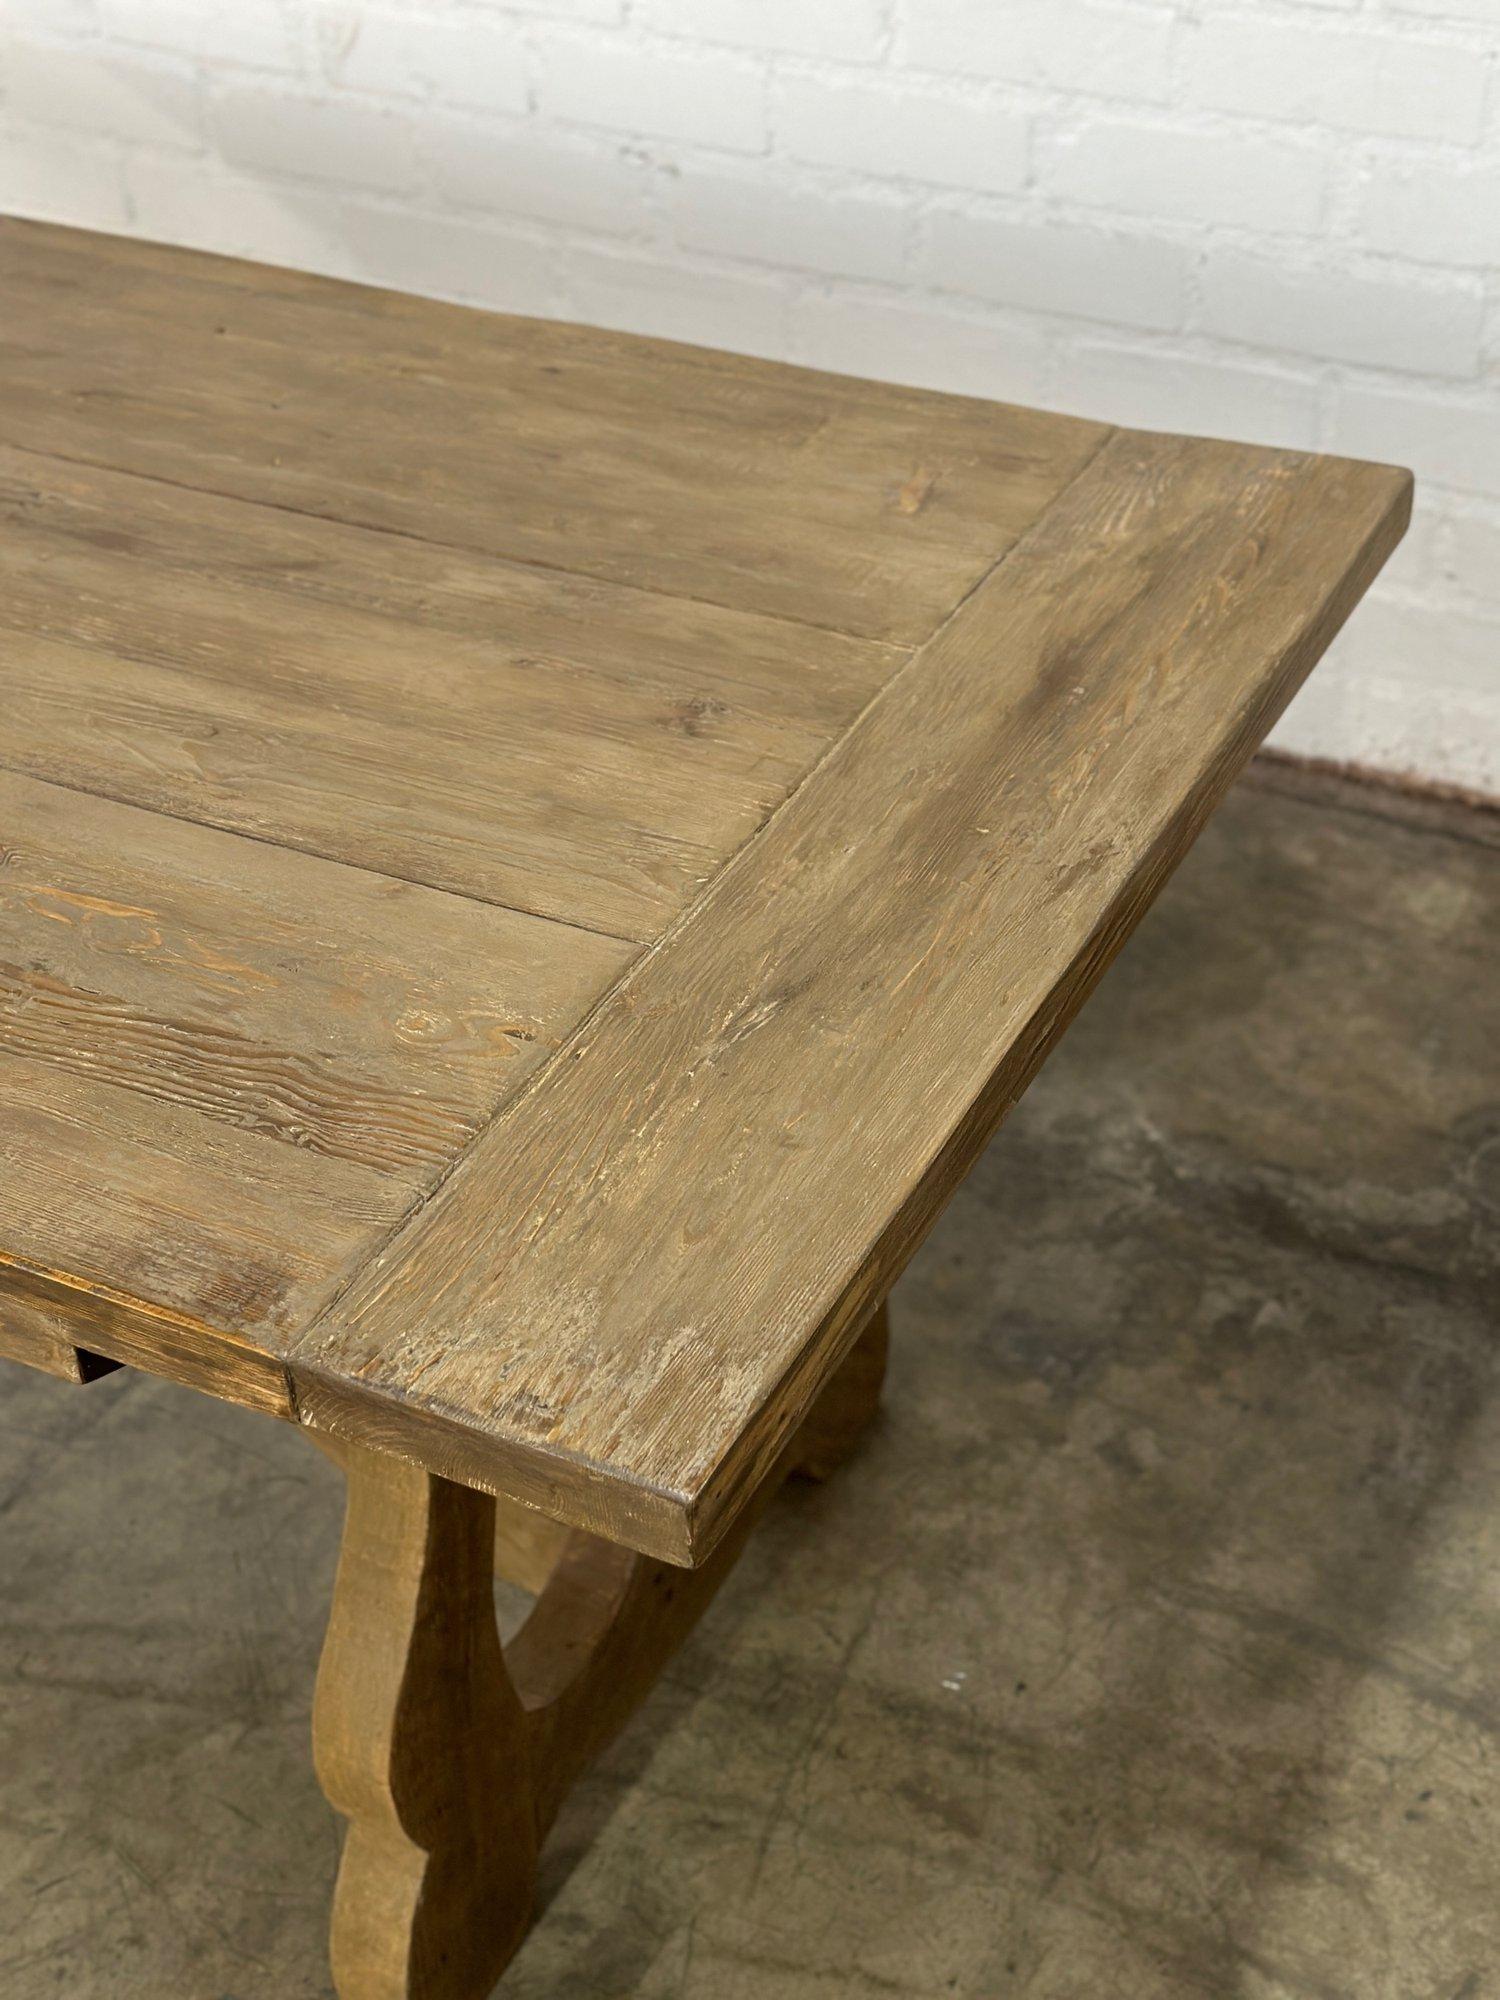 Distressed Reclaimed Pine Dining table In Good Condition For Sale In Los Angeles, CA